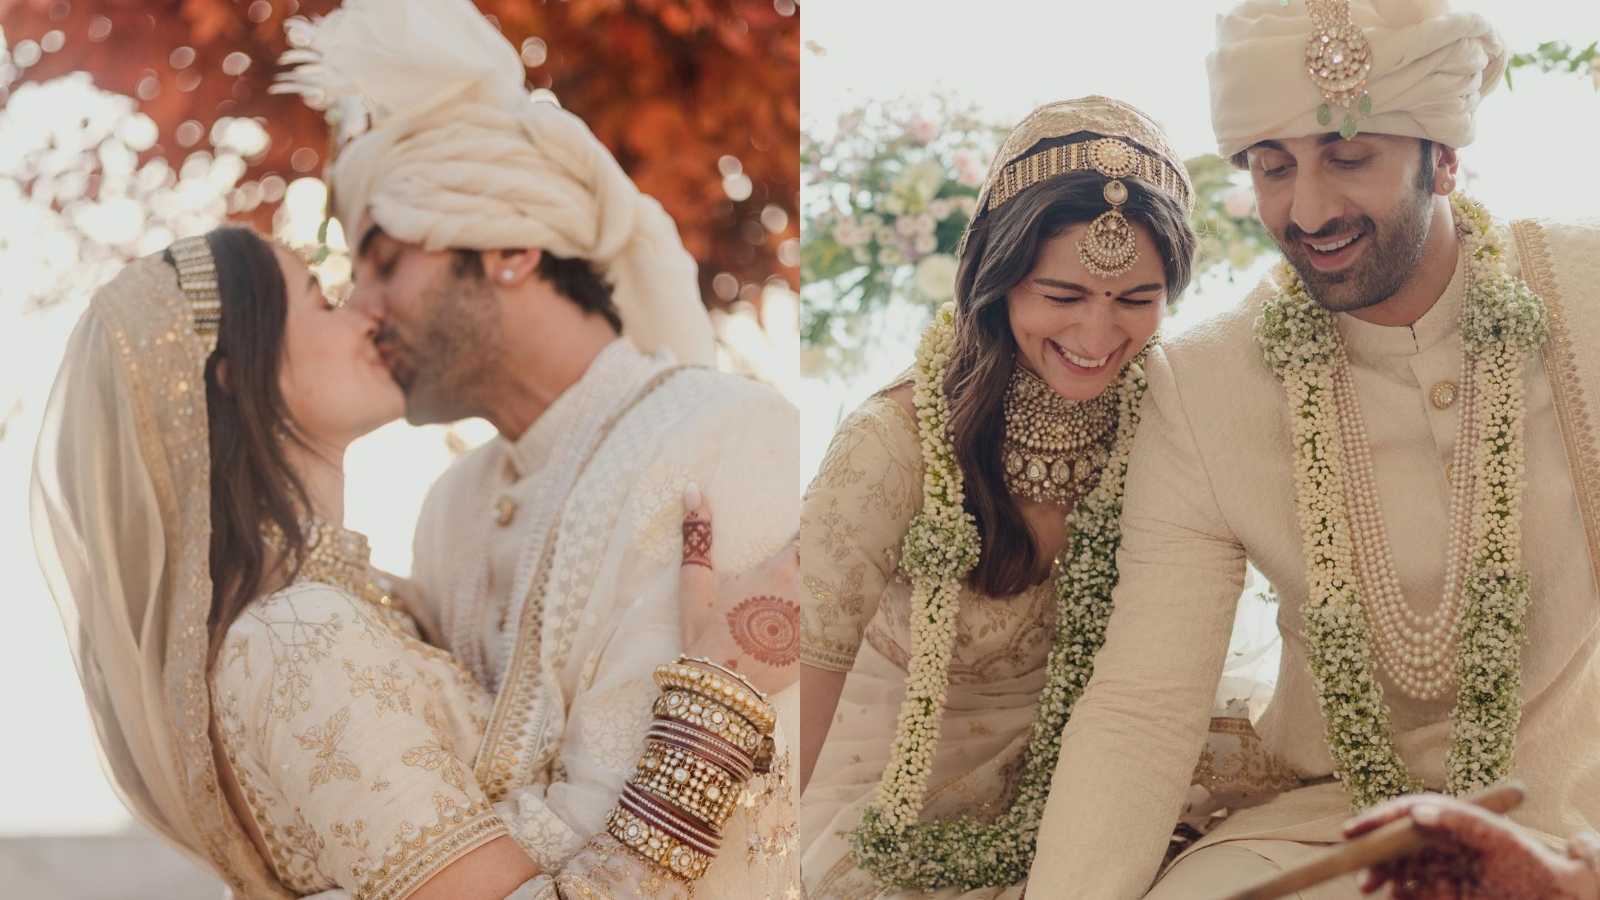 Alia Bhatt shares first photos with husband Ranbir Kapoor and they are all heart